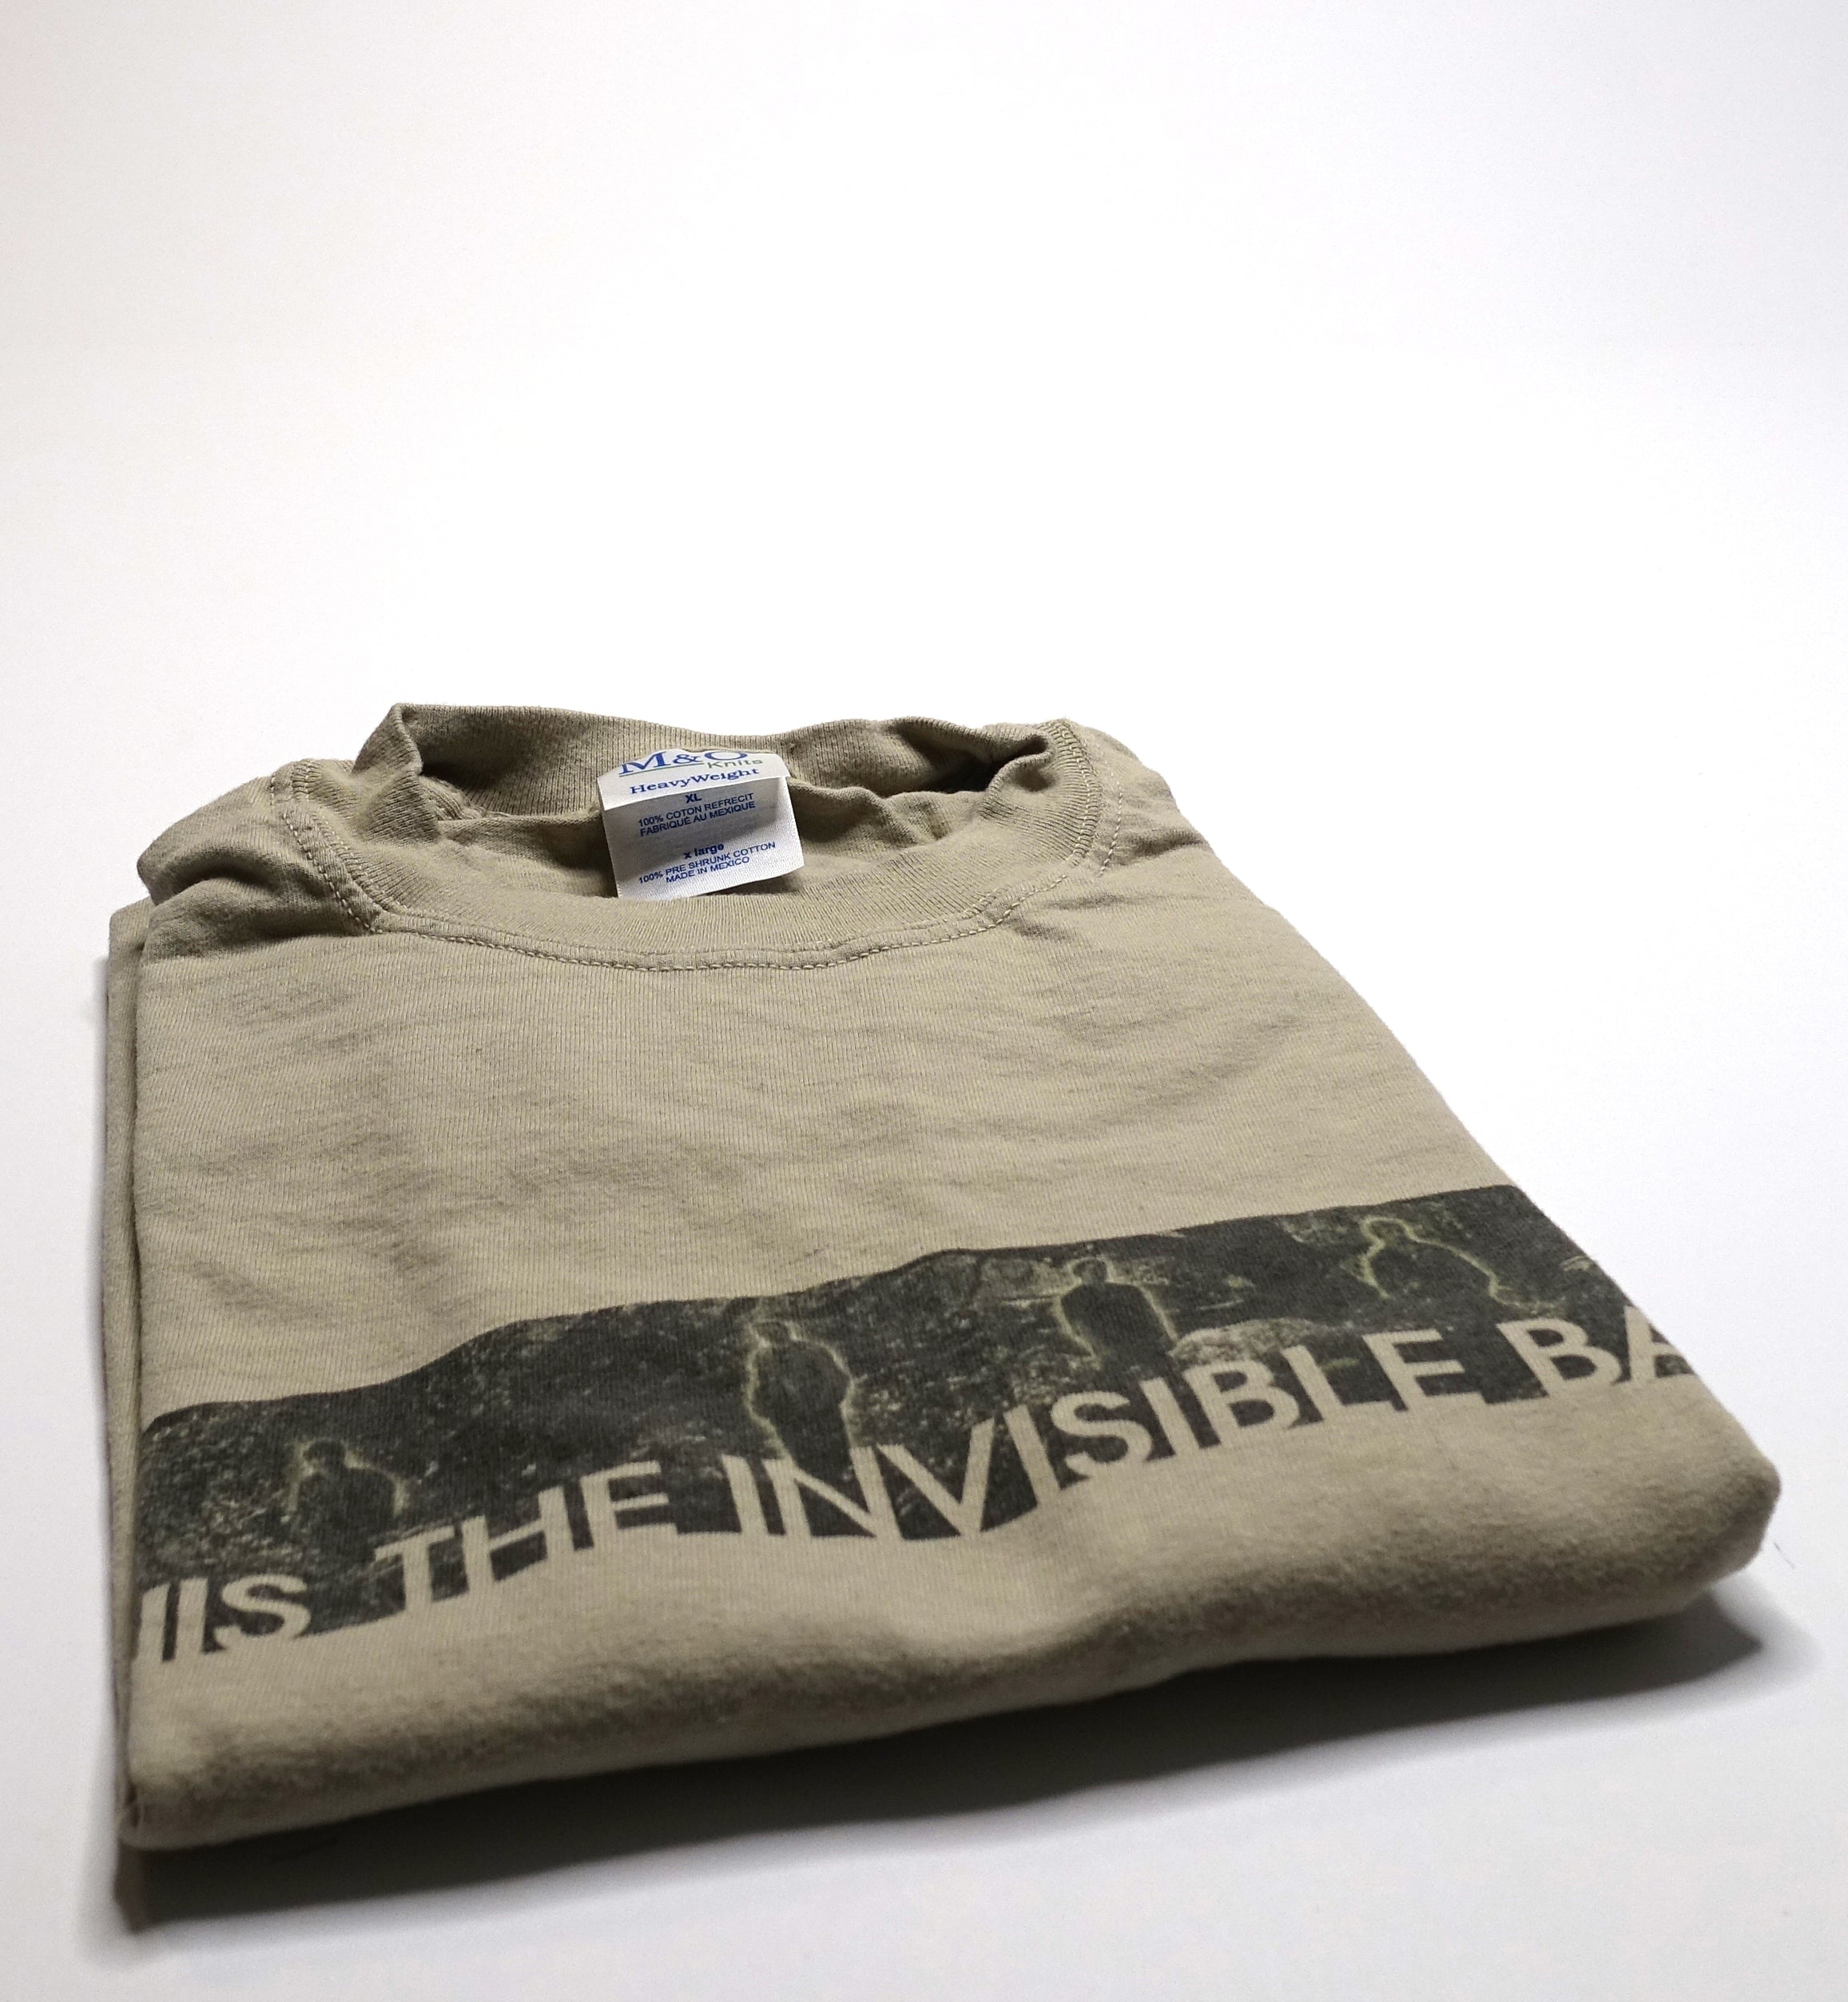 Travis – The Invisible Band Group Shot 2001 Tour Shirt Size XL